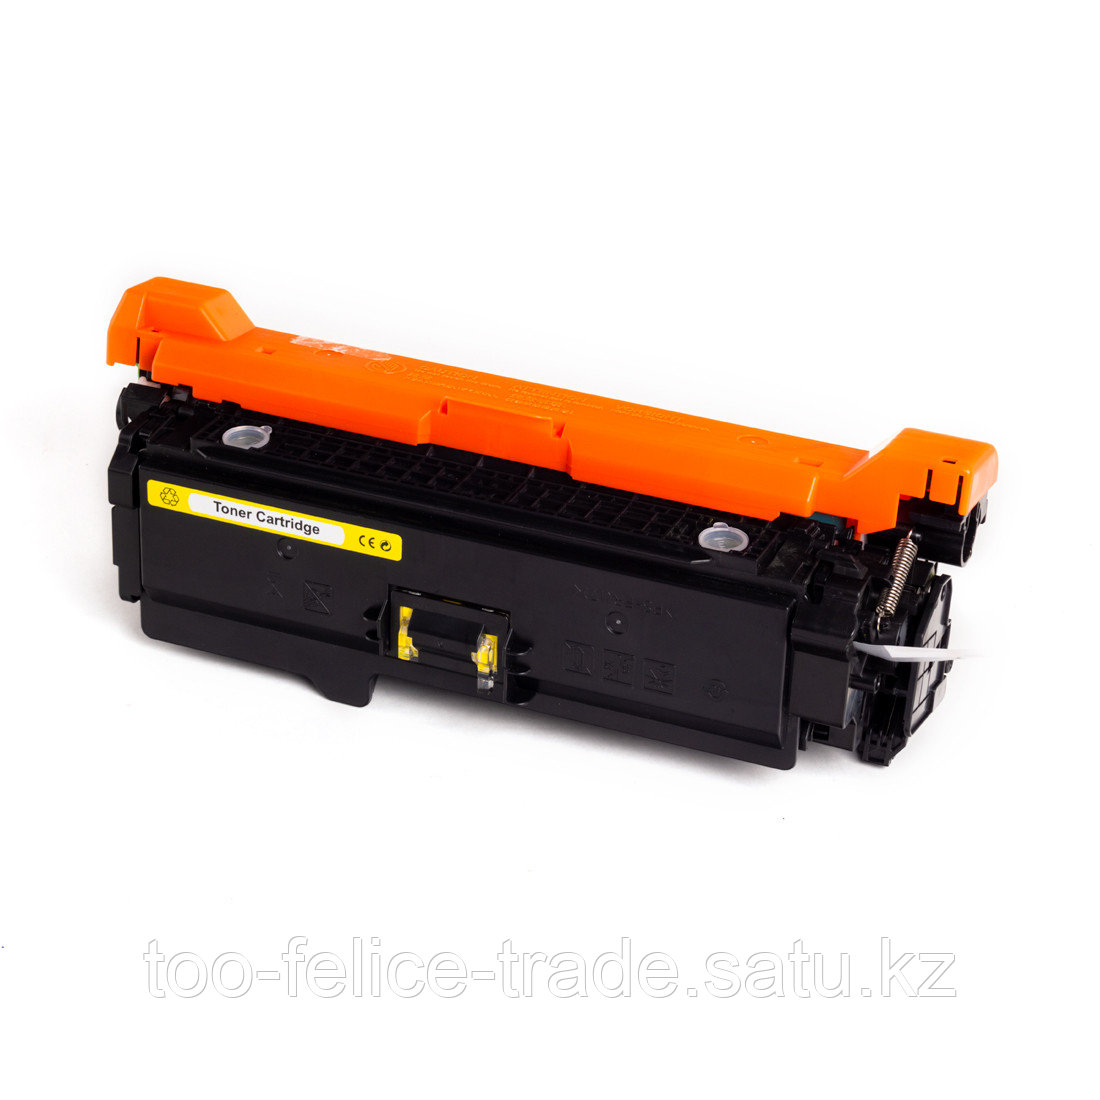 HP CE402A 507A Yellow Cartridge for Color LaserJet M551//MFP M570/MFP M575, up to 6000 pages.